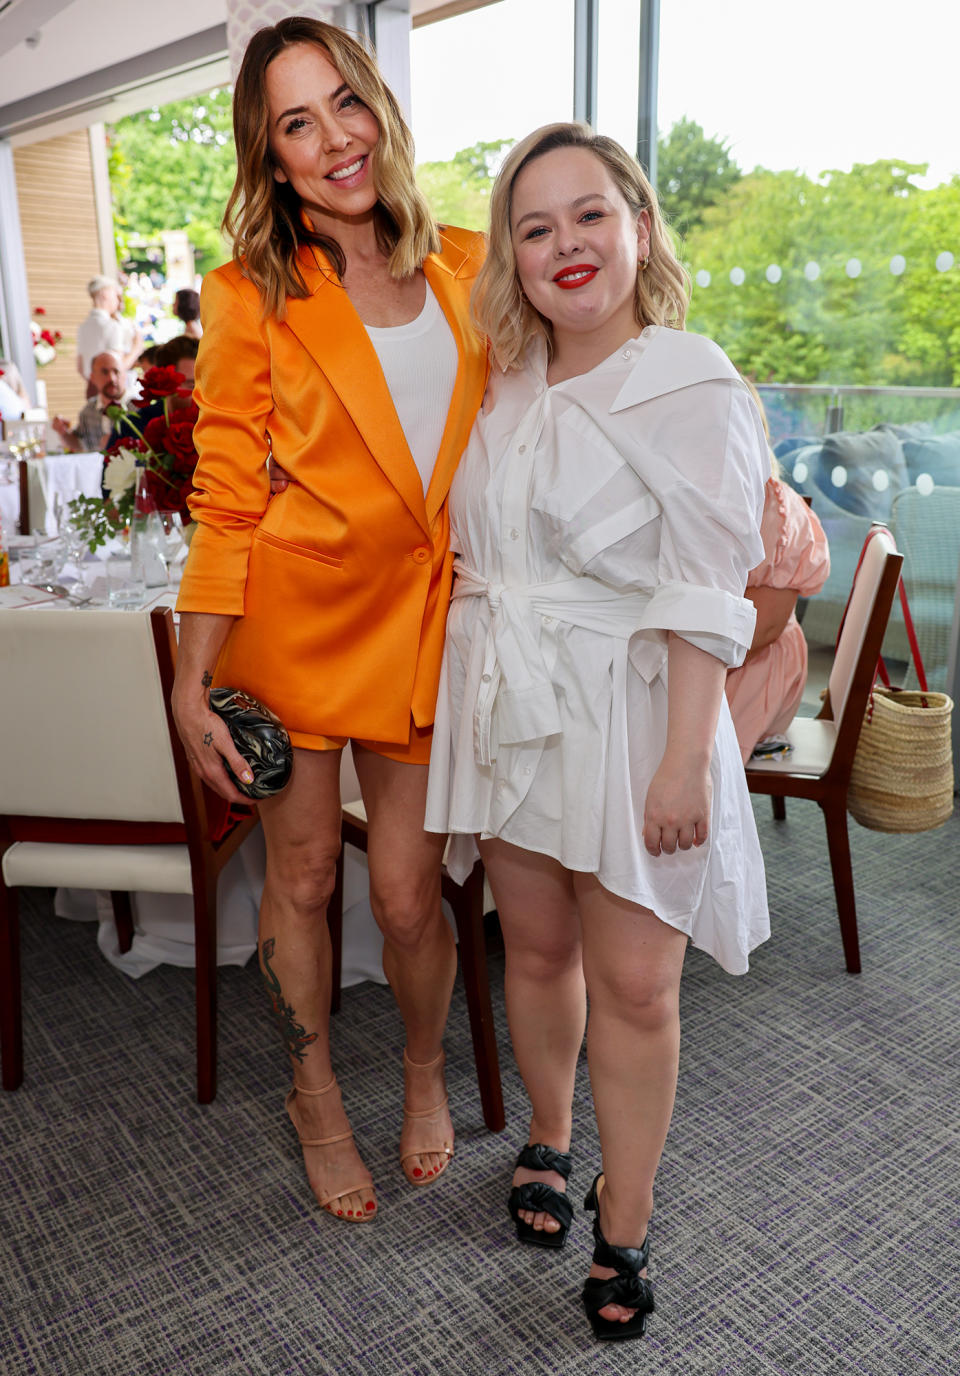 <p>Mel C, a.k.a. Sporty Spice, and Nicola Coughlan hang out in the Pimm's No. 1 hospitality suite at Wimbledon in London on June 30. </p>